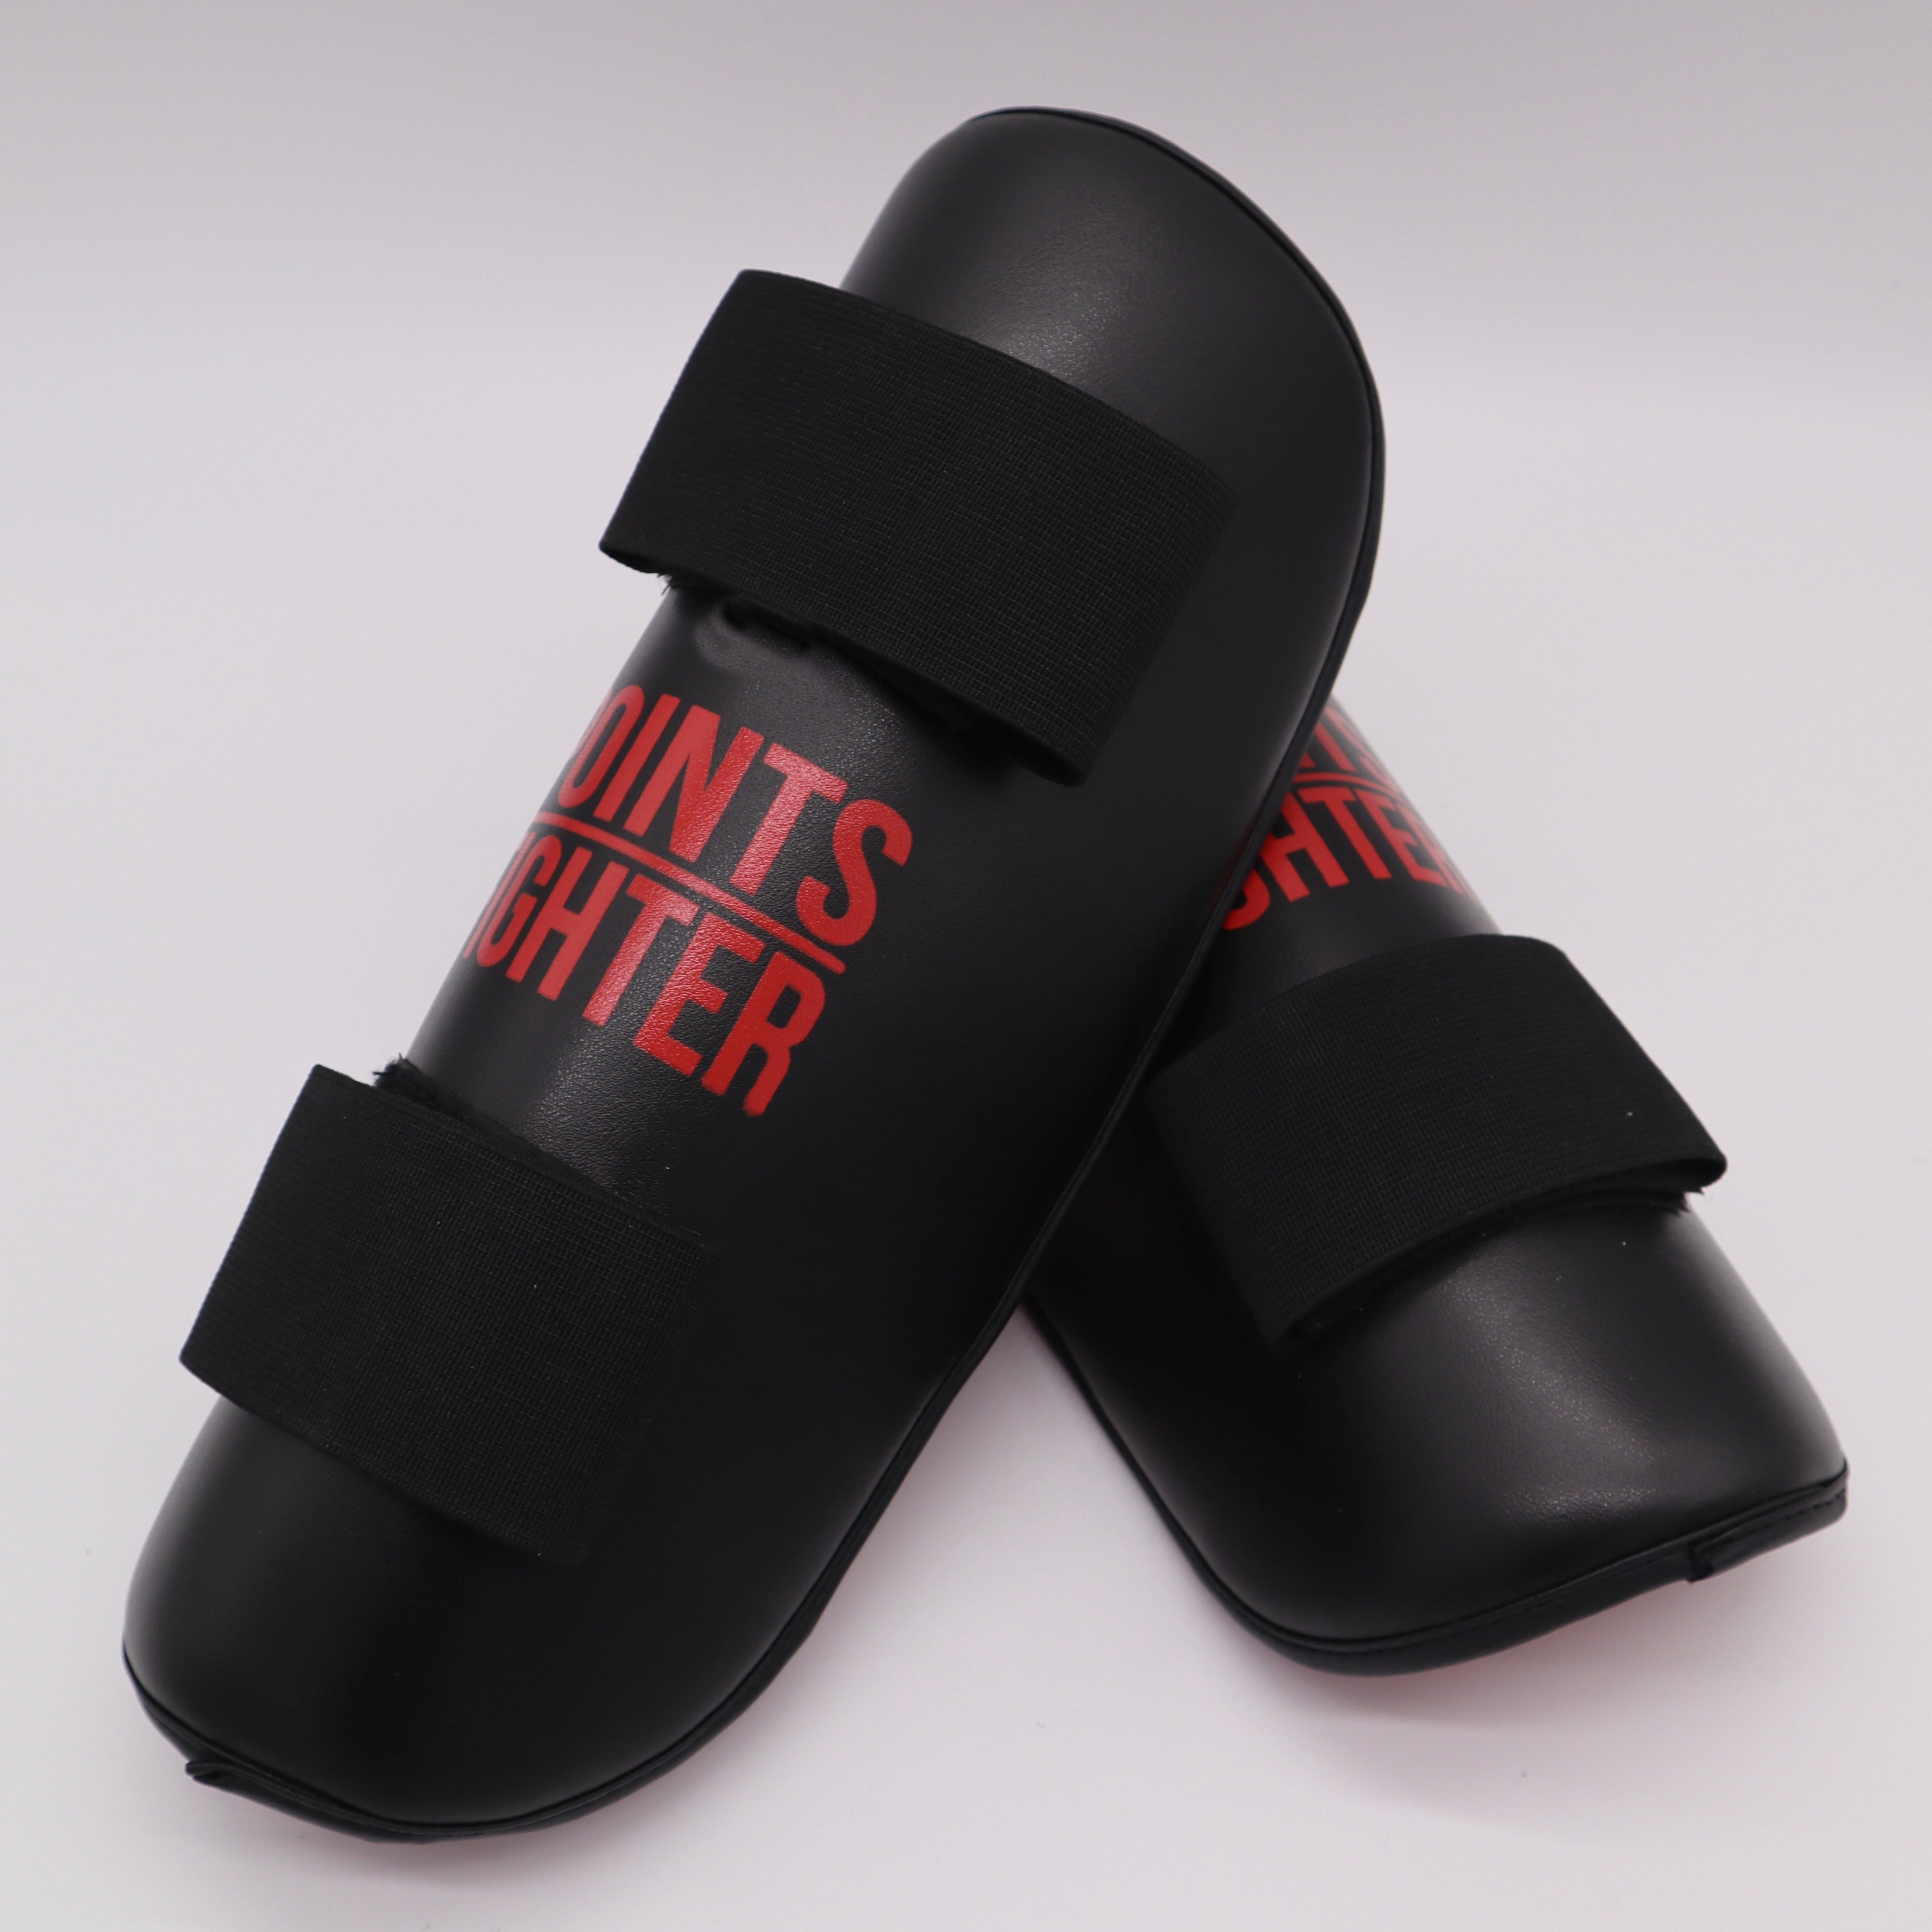 Points Fighter PRO-X Shin Pads